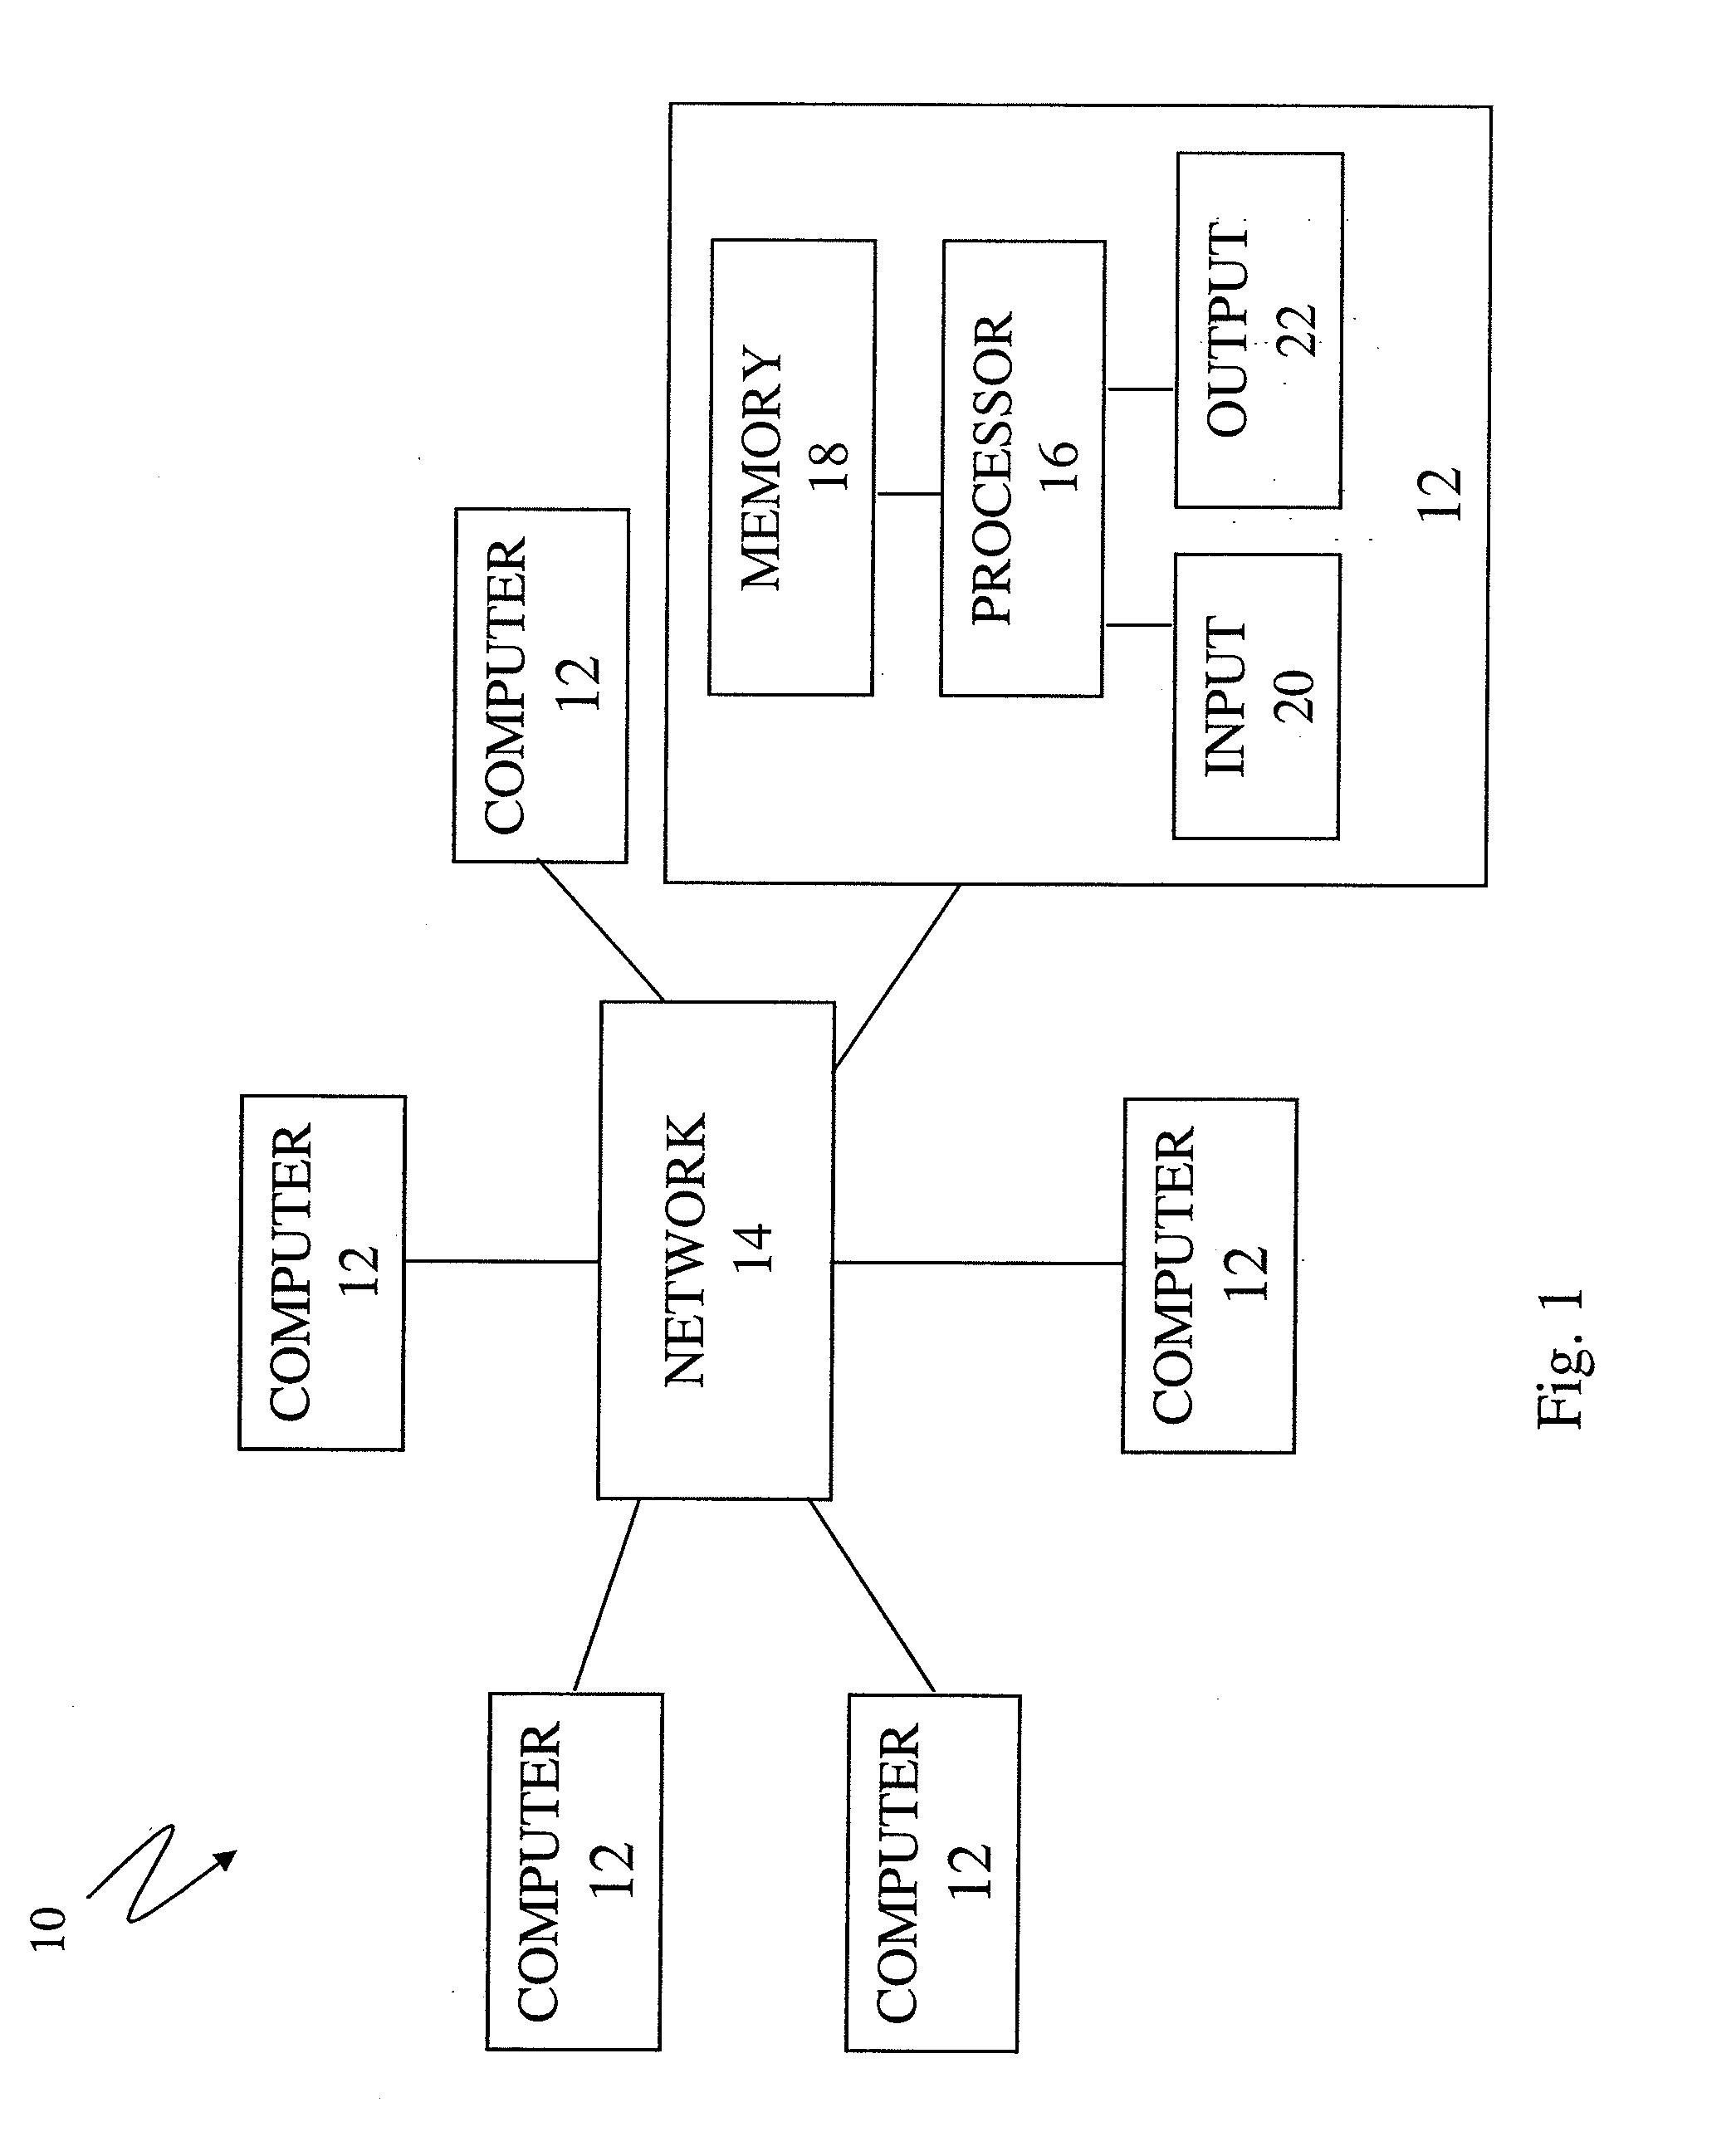 Methods and apparatuses for controlling access to computer systems and for annotating media files